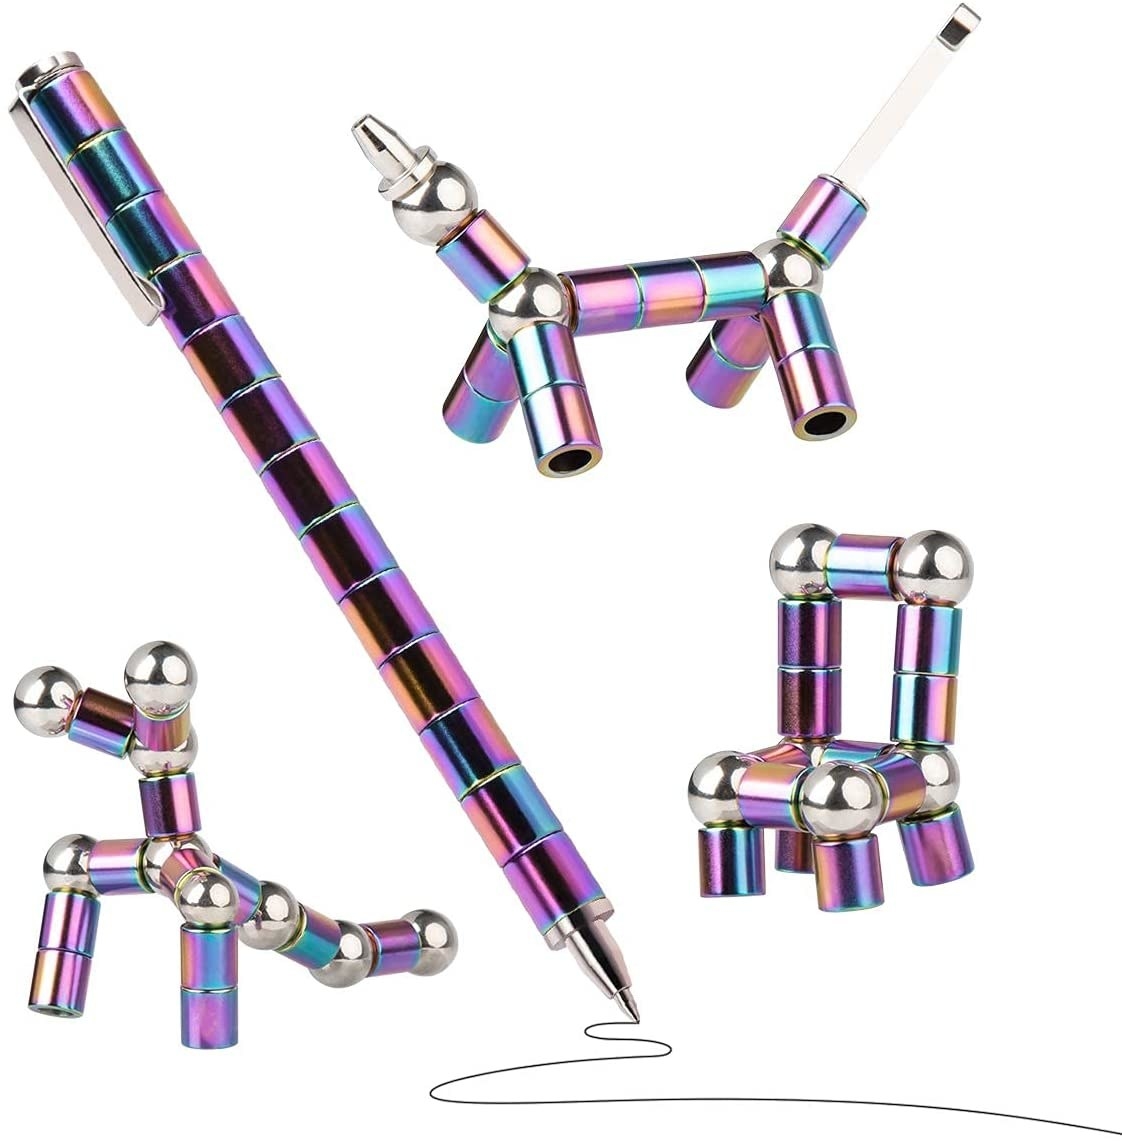 the pen in the multicolor option and a person chair and animal made using the magnets in the pen